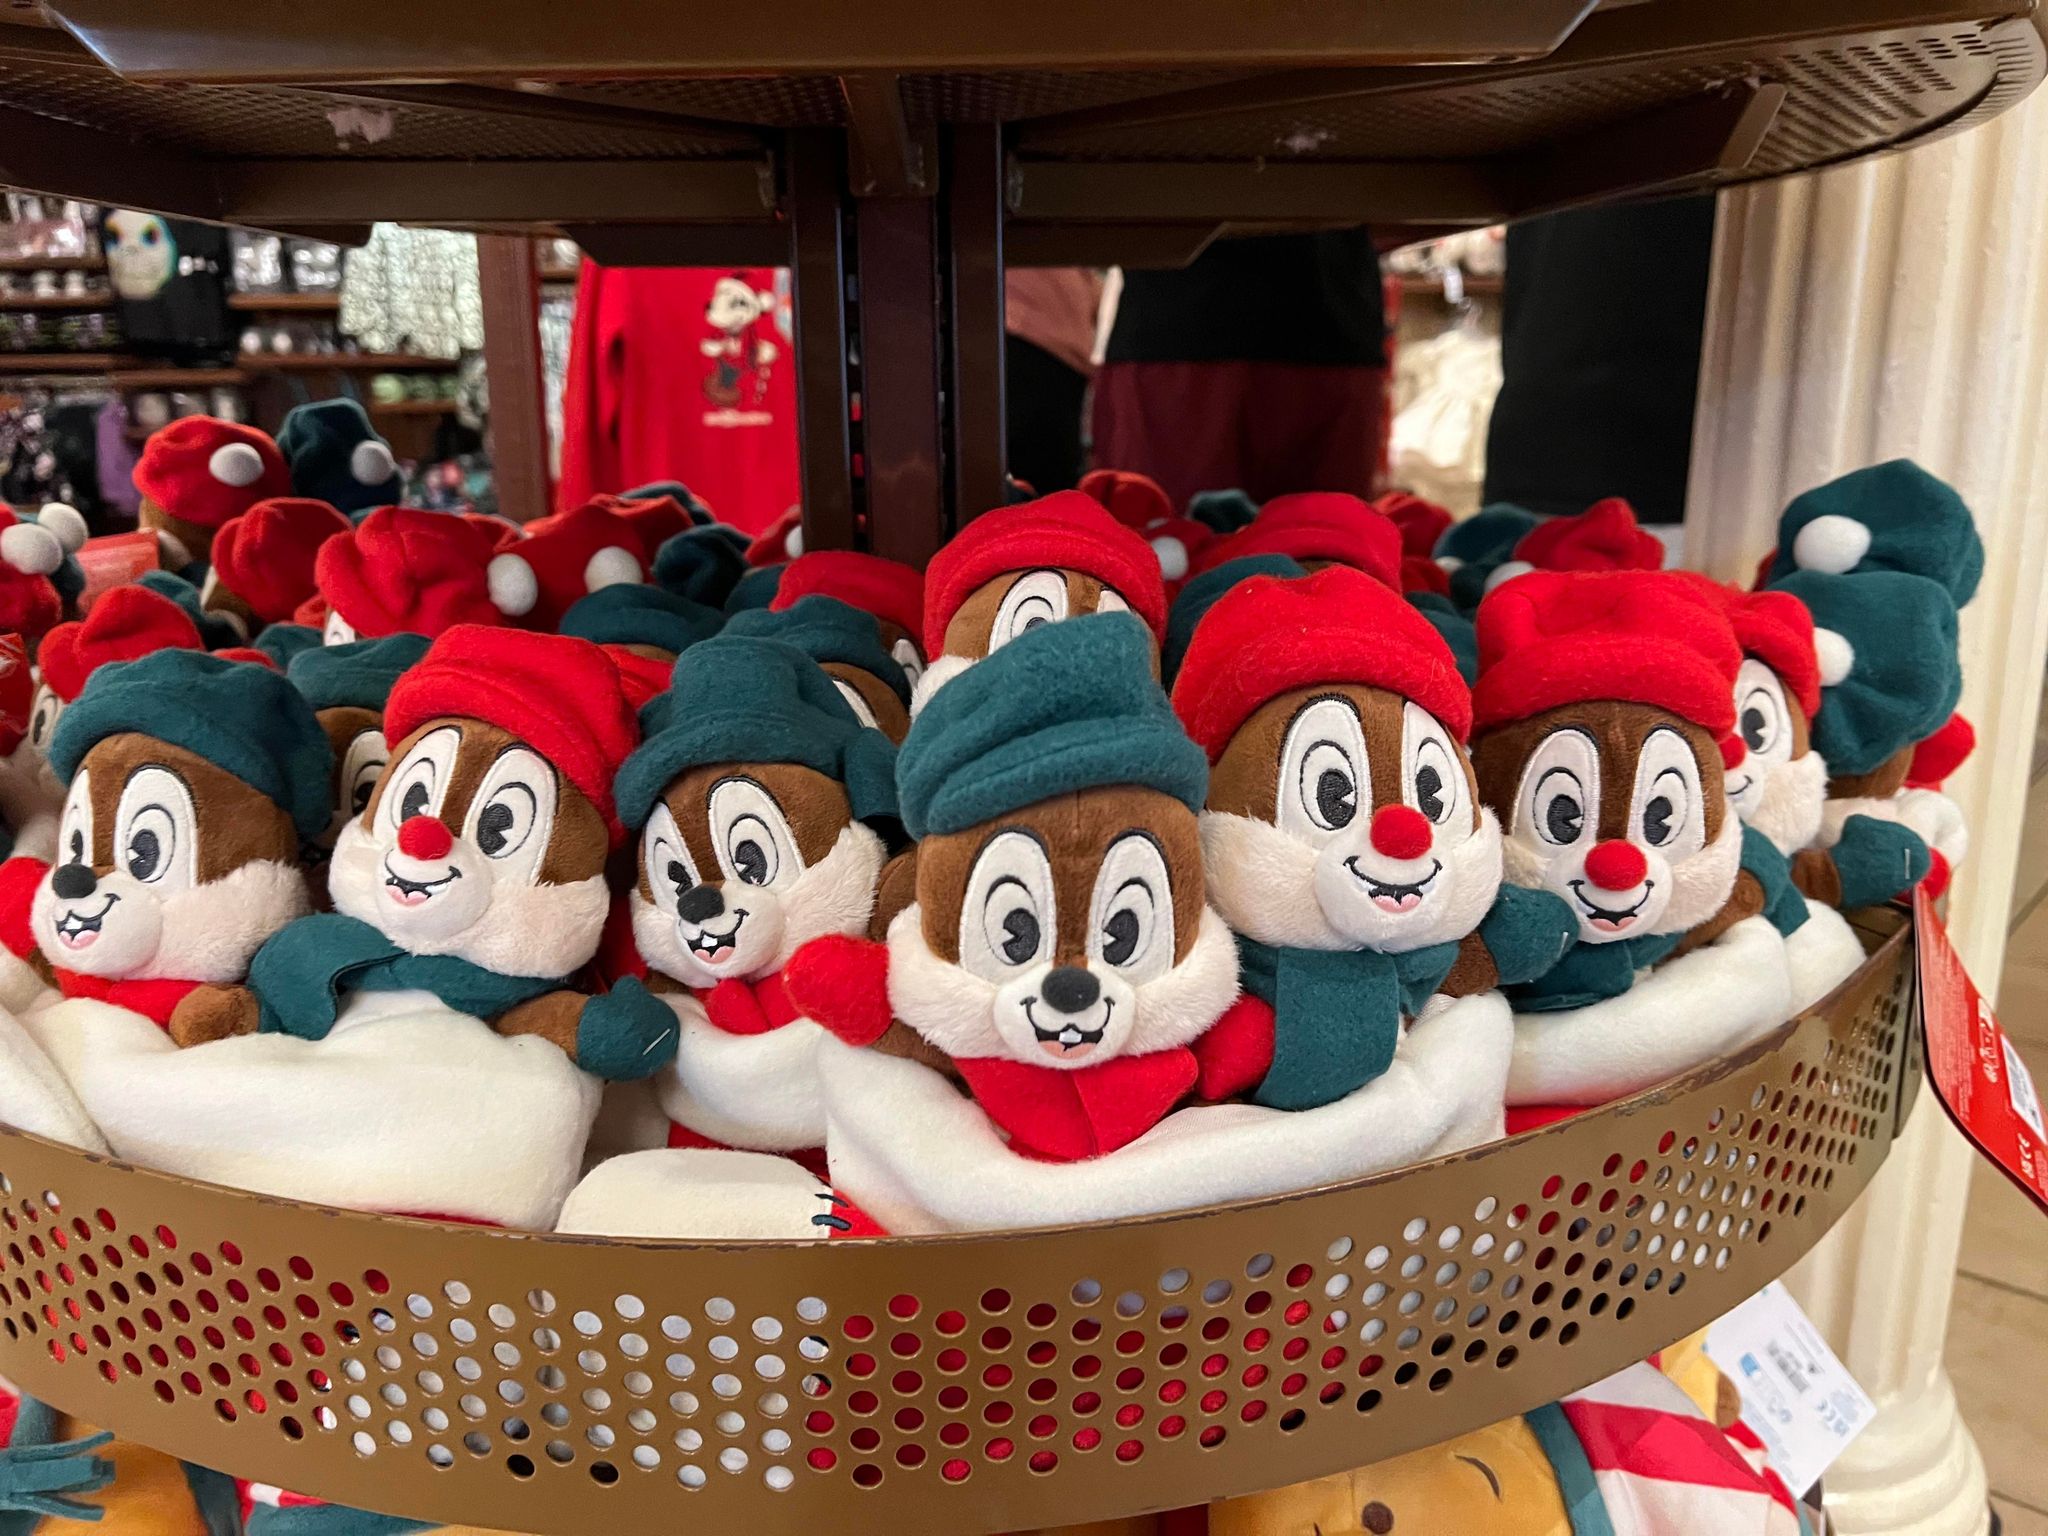 https://mickeyblog.com/wp-content/uploads/2022/11/holiday-plushes-22-5.jpg